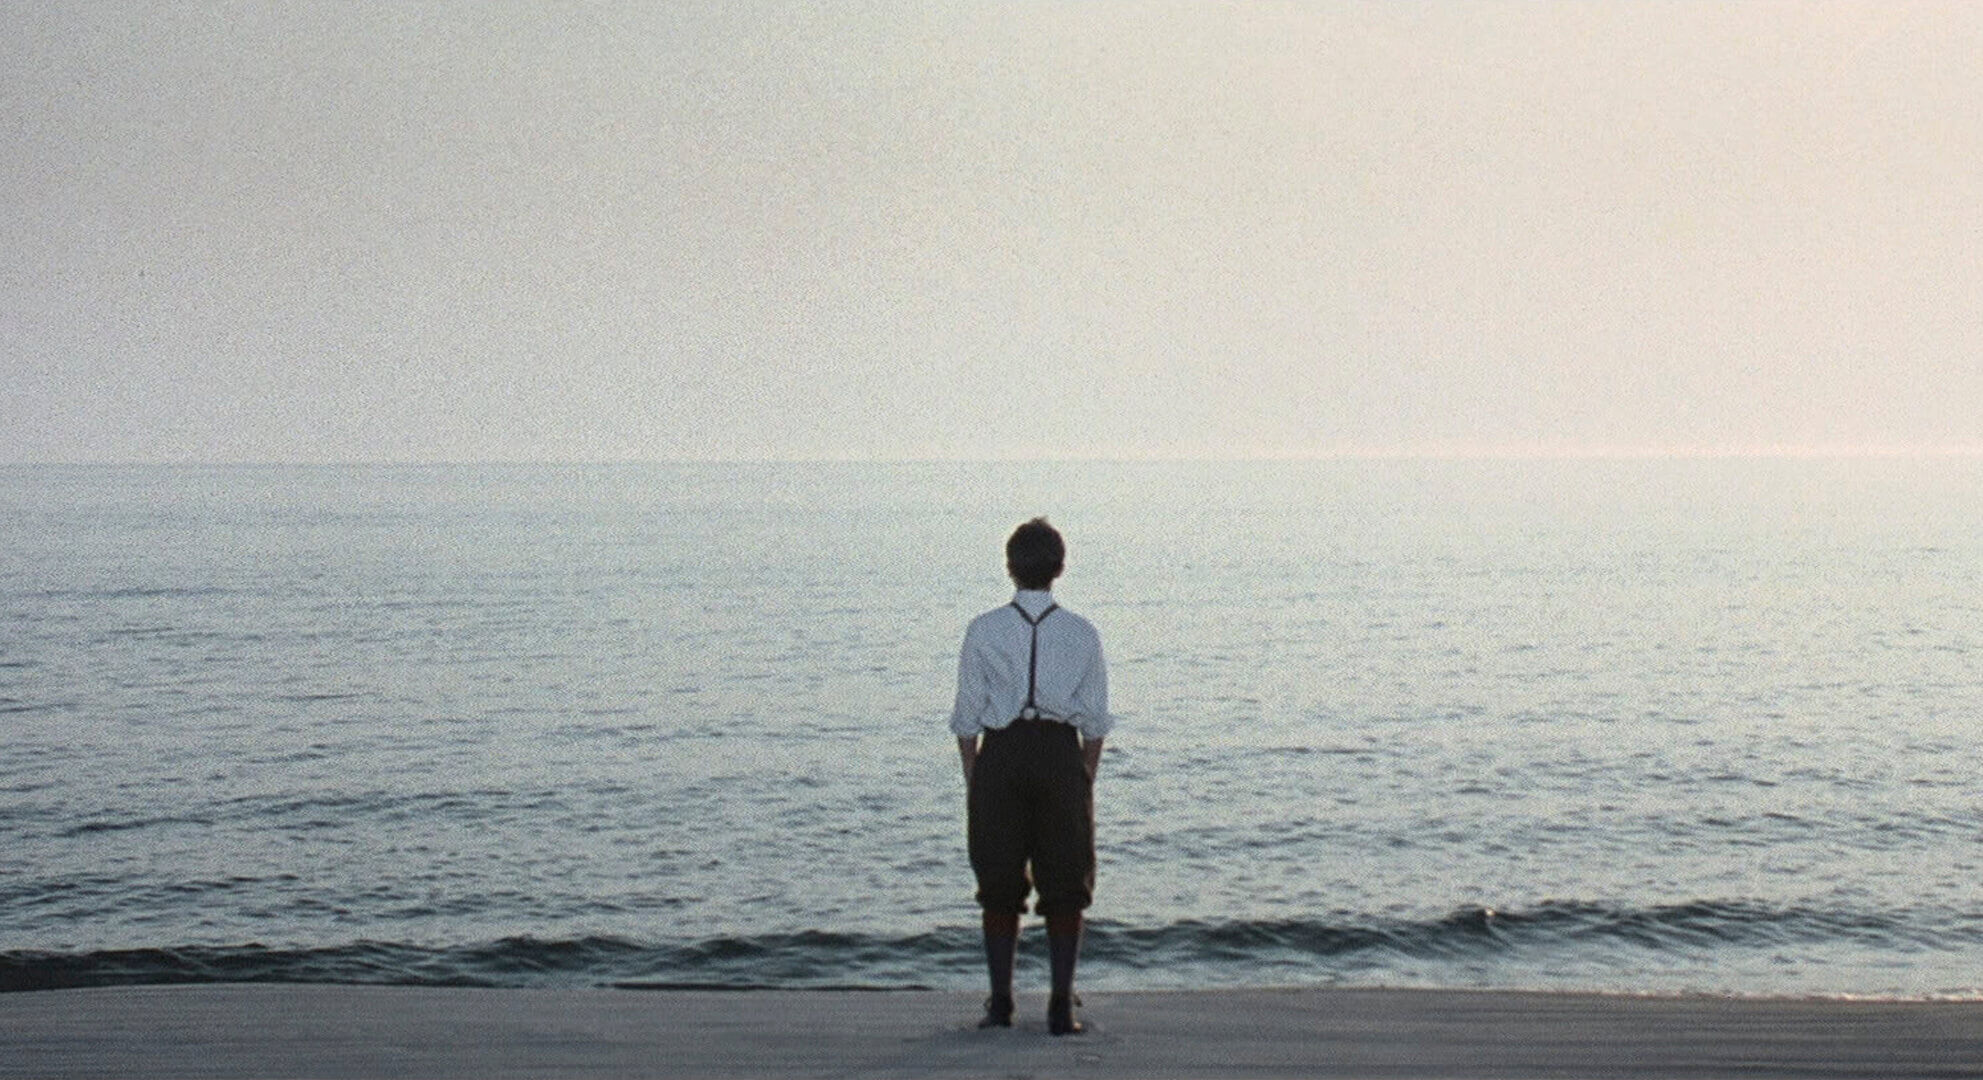 A young boy looking over the ocean in 'Road to Perdition'